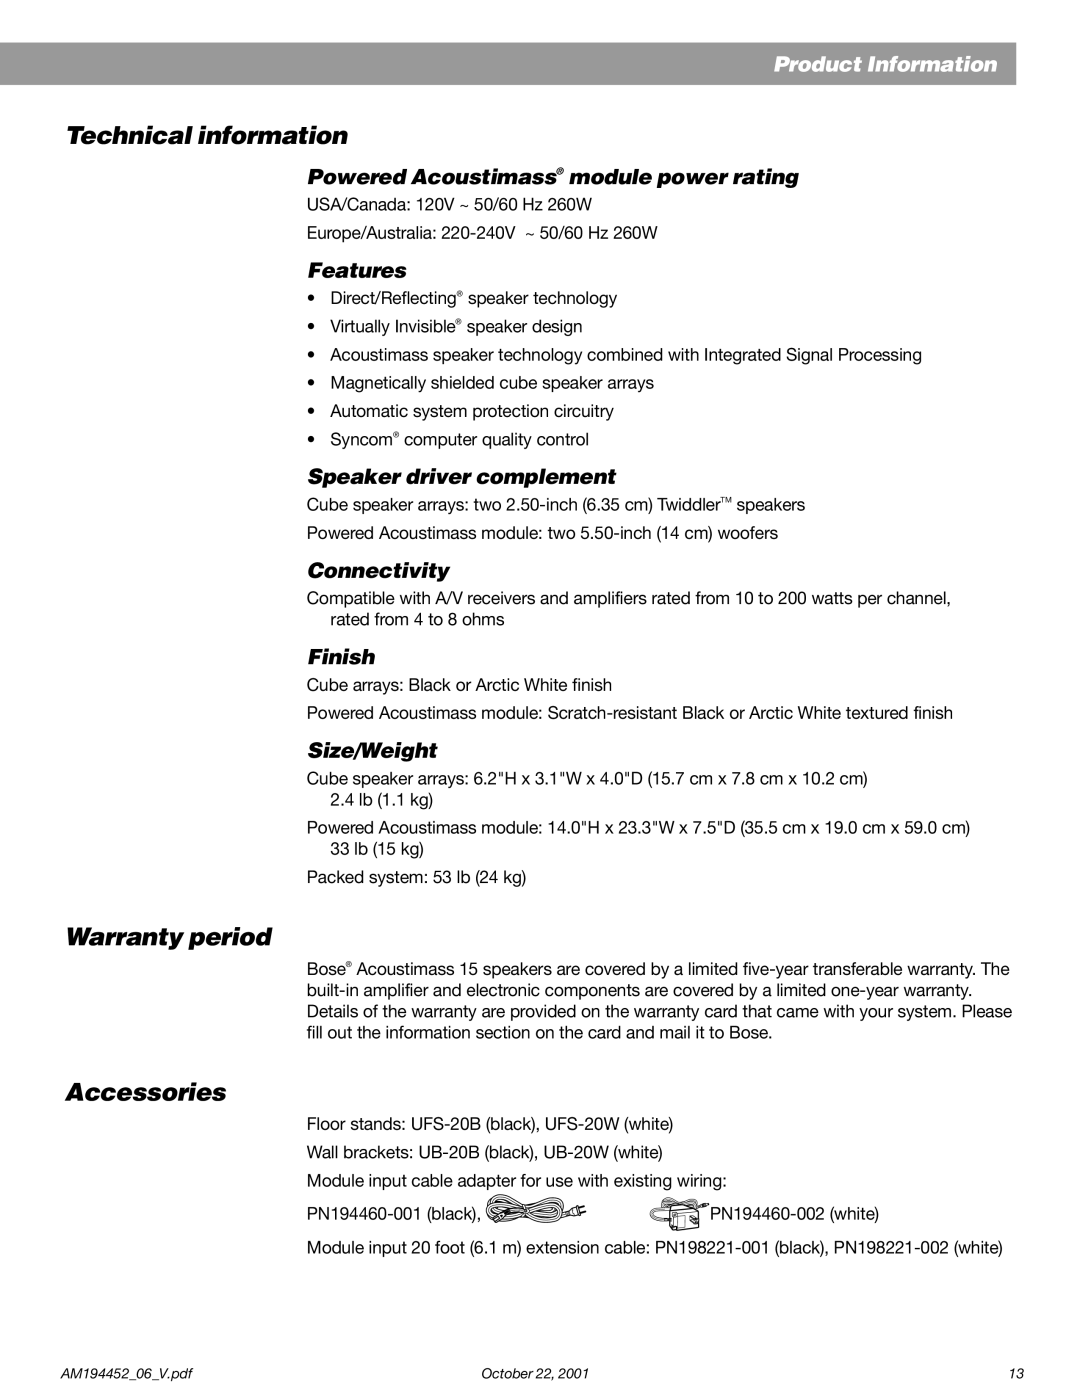 Bose Acoustimass manual Technical information, Warranty period, Accessories, Product Information 